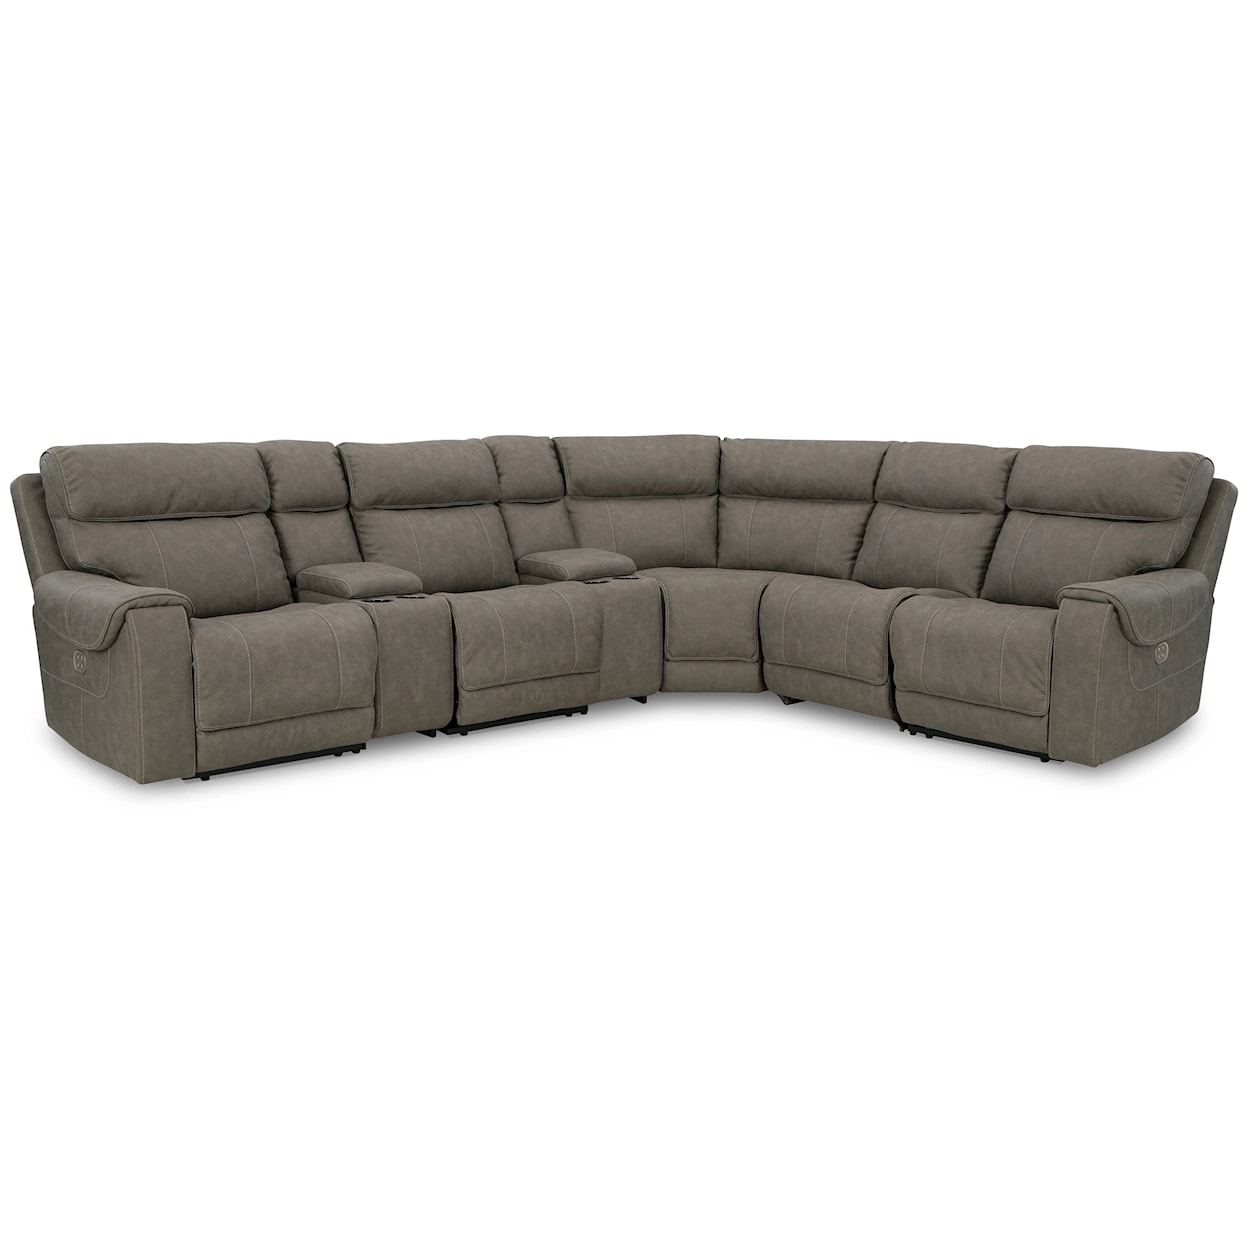 Signature Starbot 7-Piece Power Reclining Sectional